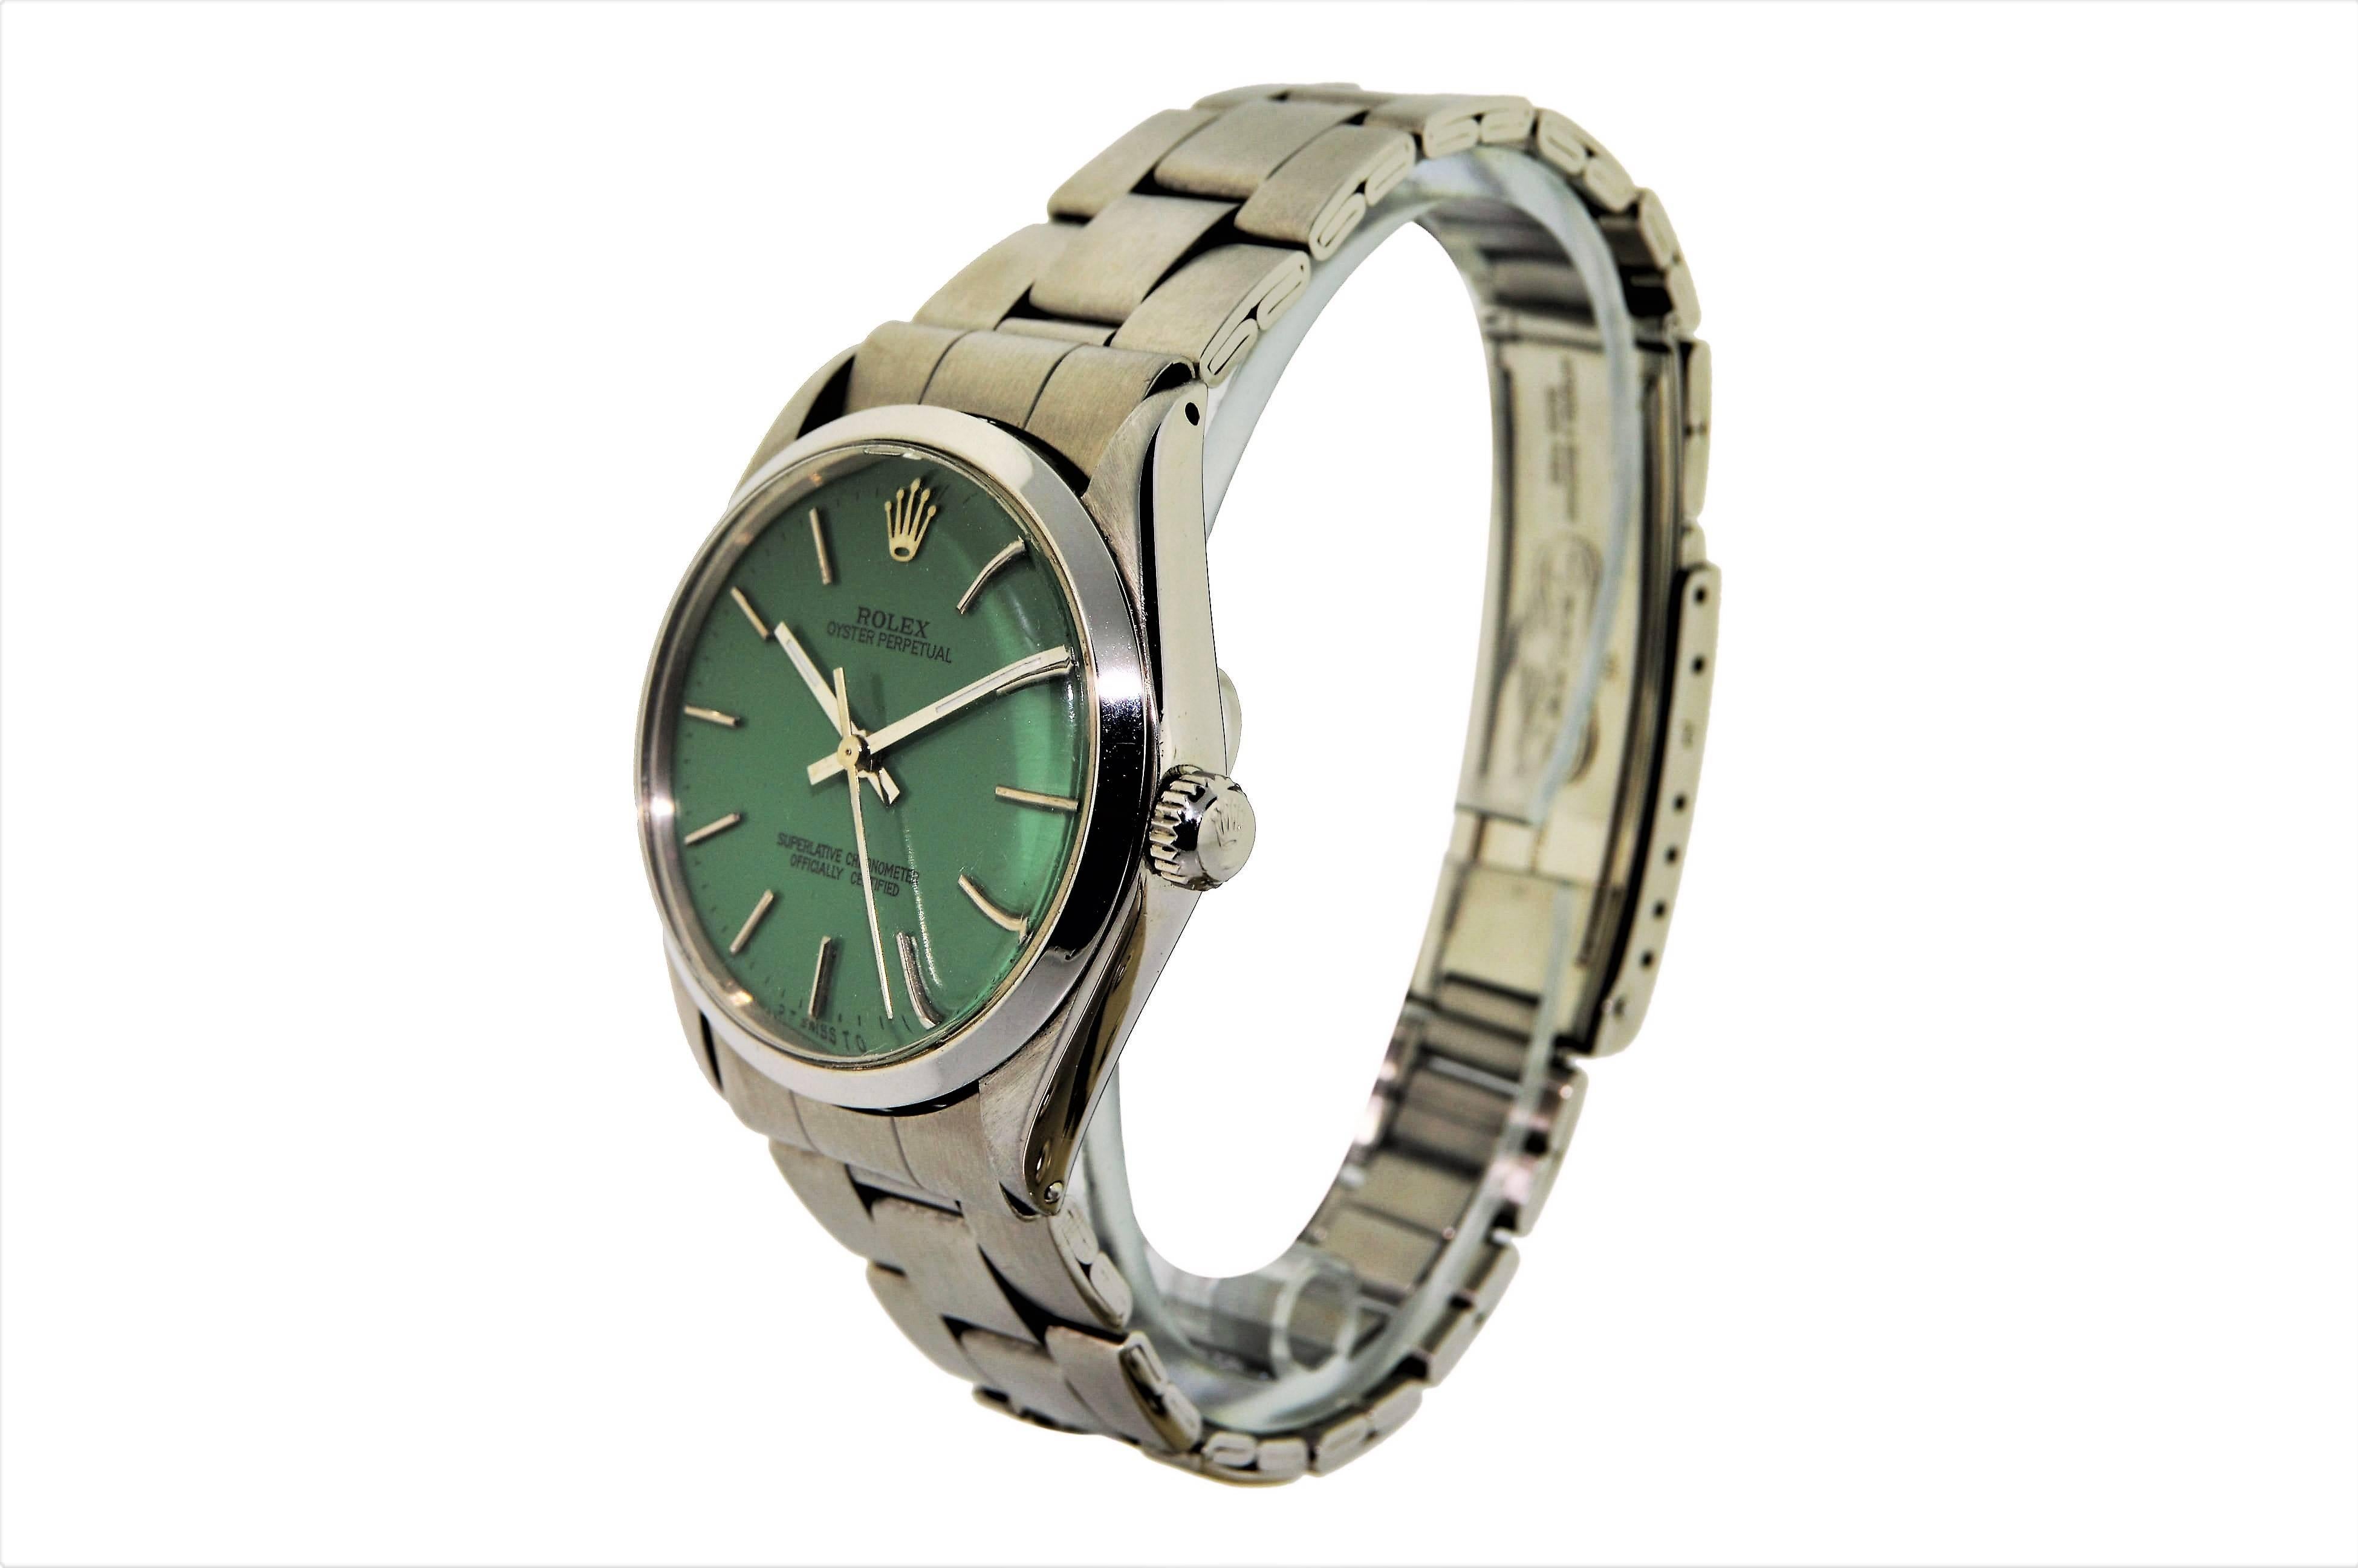 FACTORY / HOUSE: Rolex Watch Company
STYLE / REFERENCE: Oyster Perpetual / 5500
METAL: Stainless Steel 
CIRCA: 1970's
MOVEMENT / CALIBER: 26 Jewels / 1570
DIAL / HANDS: Original Dial with custom Green Finish / Baton Hands
DIMENSIONS:  39mm X 